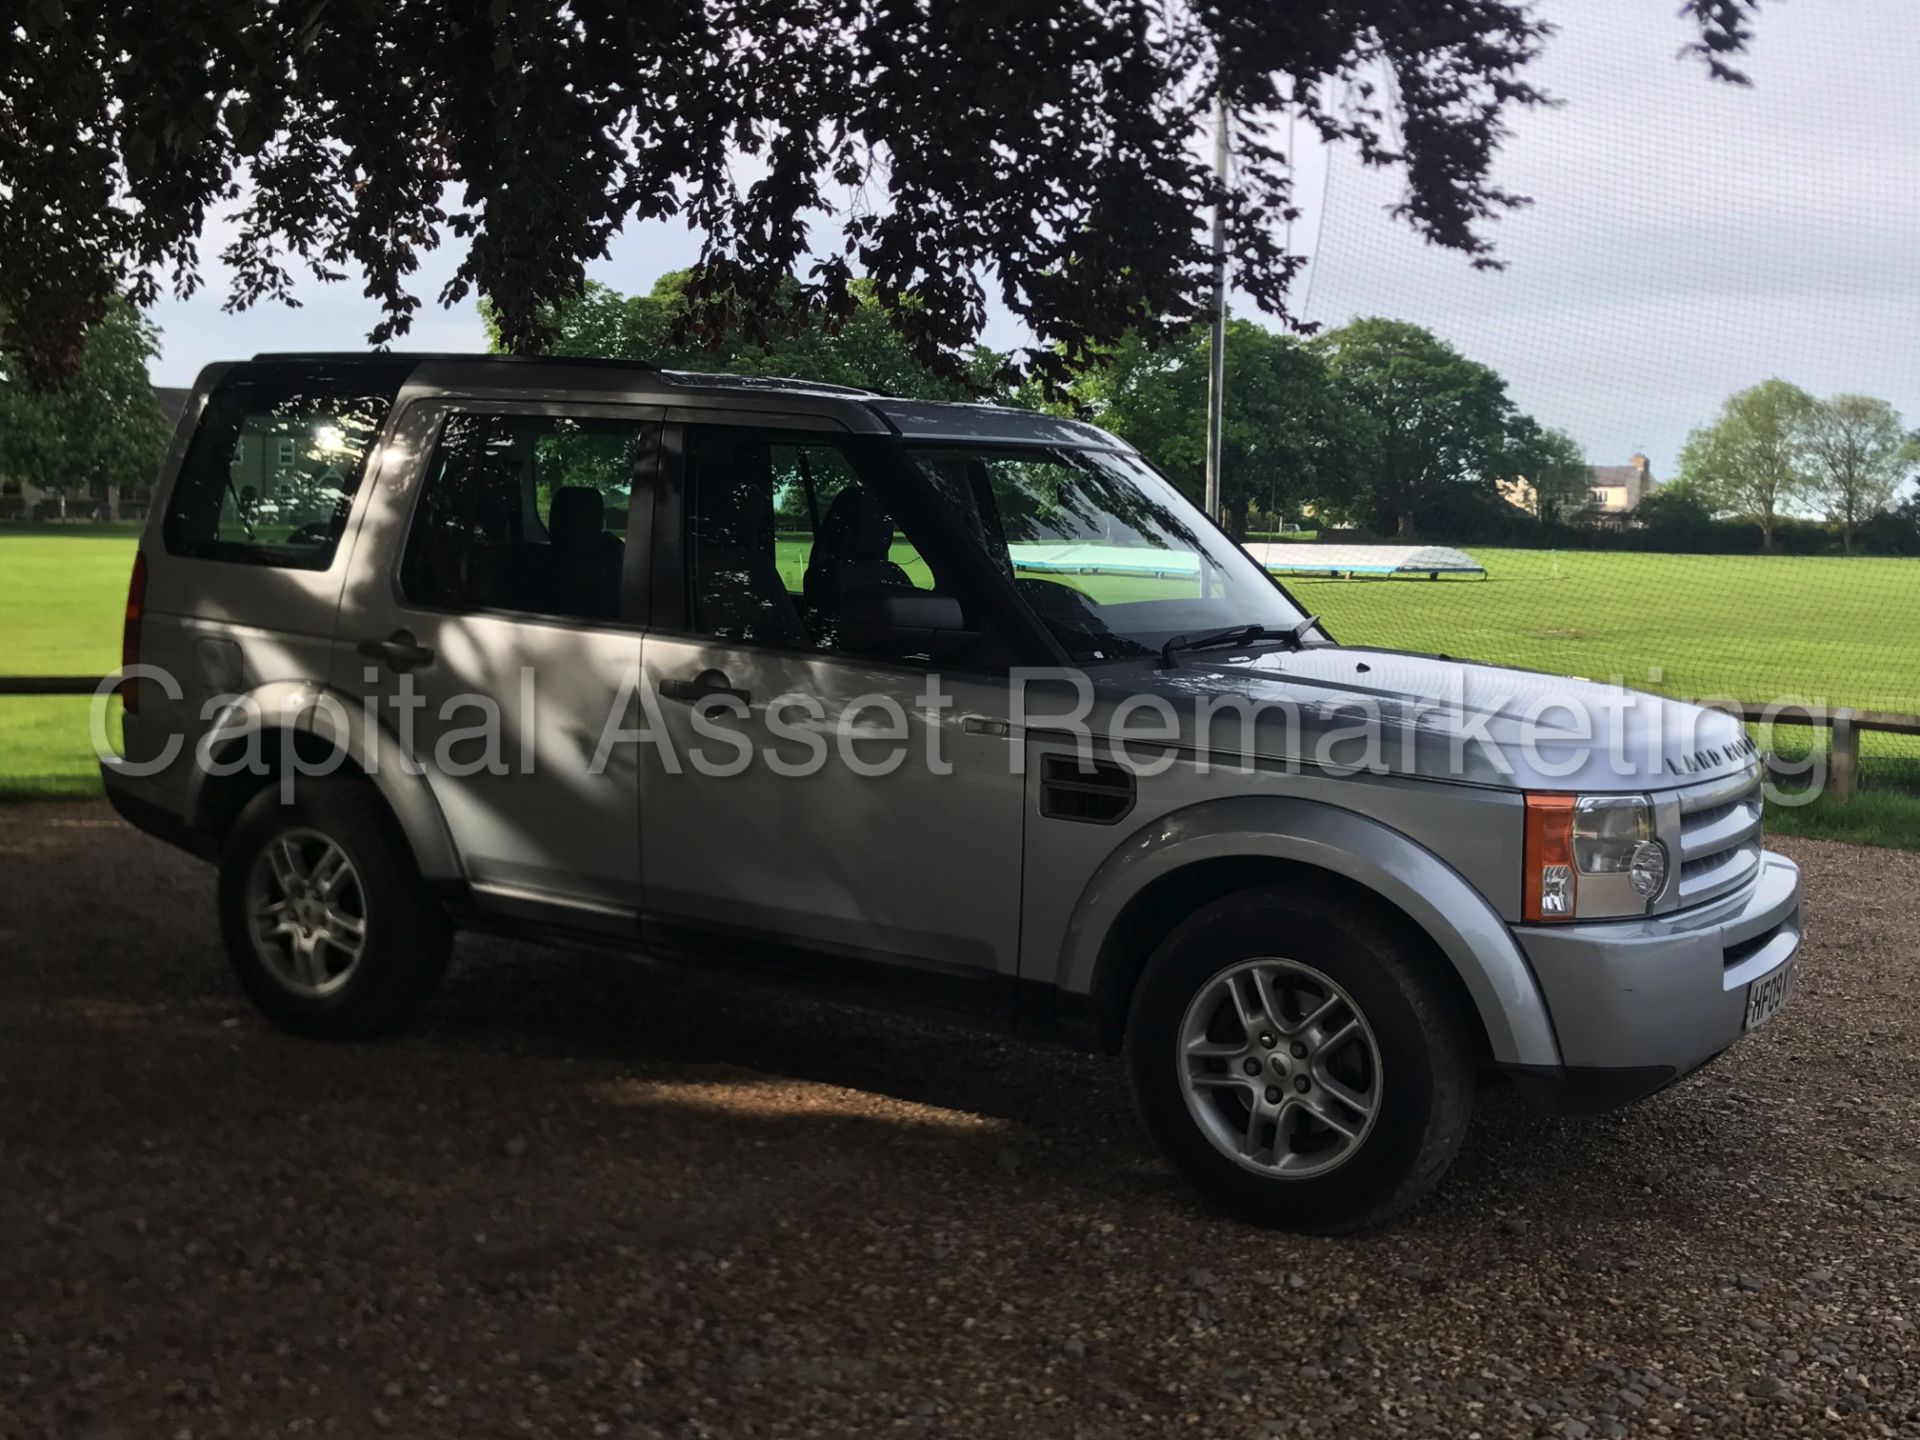 (On Sale) LAND ROVER DISCOVERY 3 (2009) 2.7 TDV6 - AUTO - 7 SEATER - AIR SUSPENSION (NO VAT) - Image 7 of 29